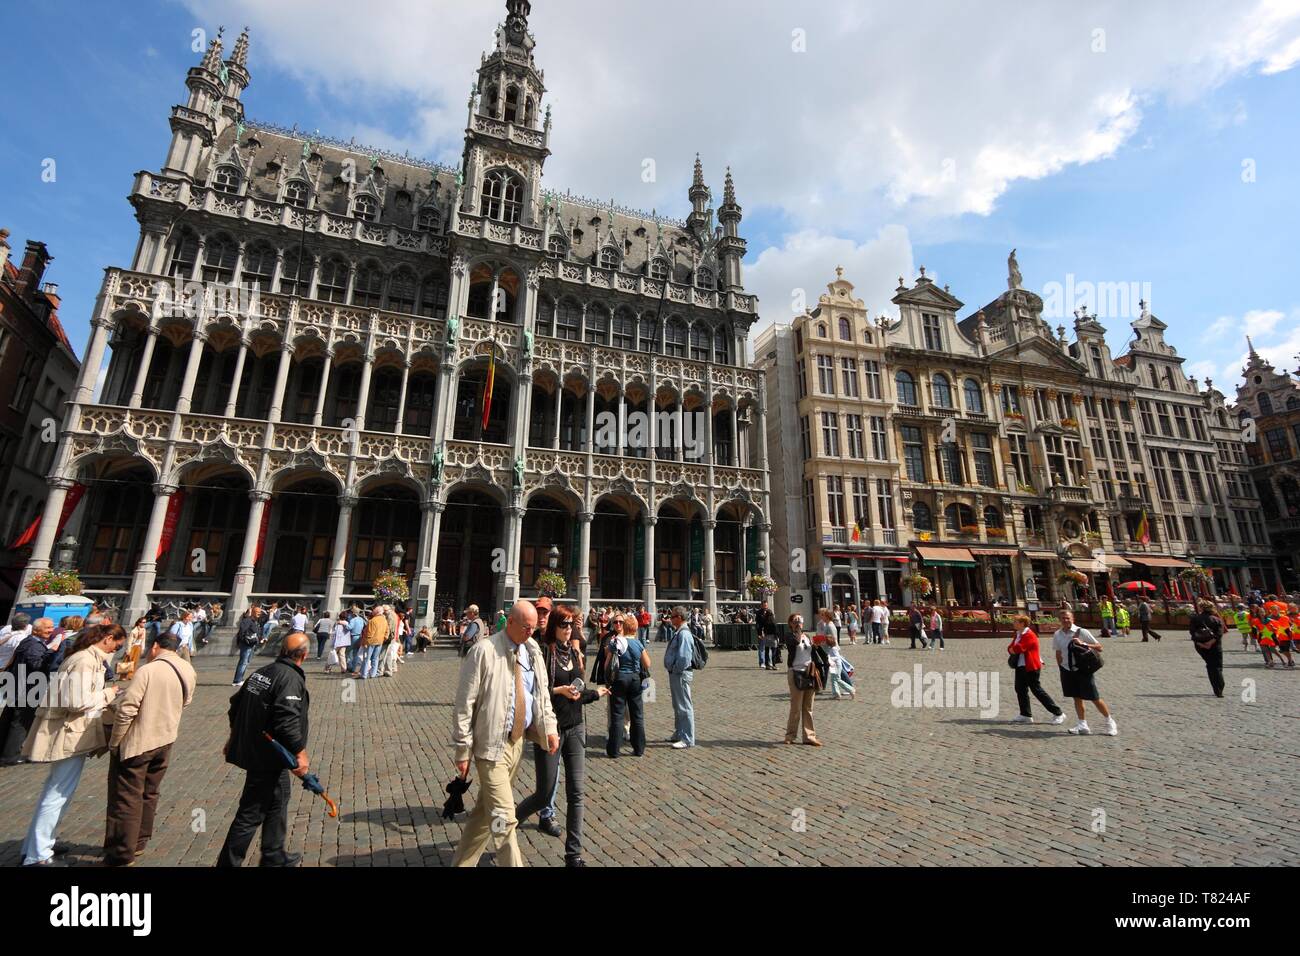 BRUSSELS, BELGIUM - AUGUST 25, 2008: People visit Grand Place view in Brussels, Belgium. Grand Place is a UNESCO World Heritage Site. It features old  Stock Photo